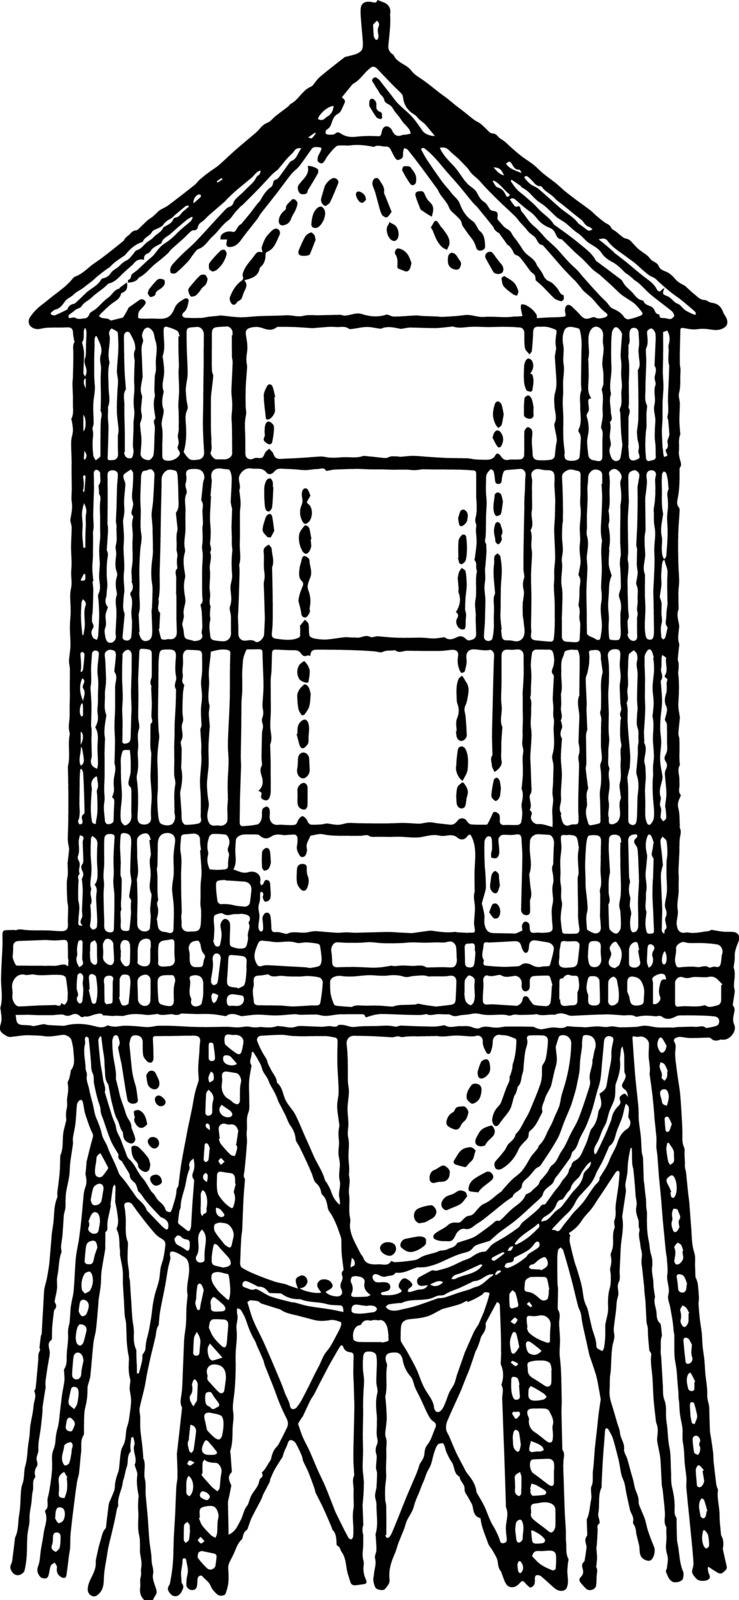 In this image showing the curved surface area, vintage line drawing or engraving illustration.